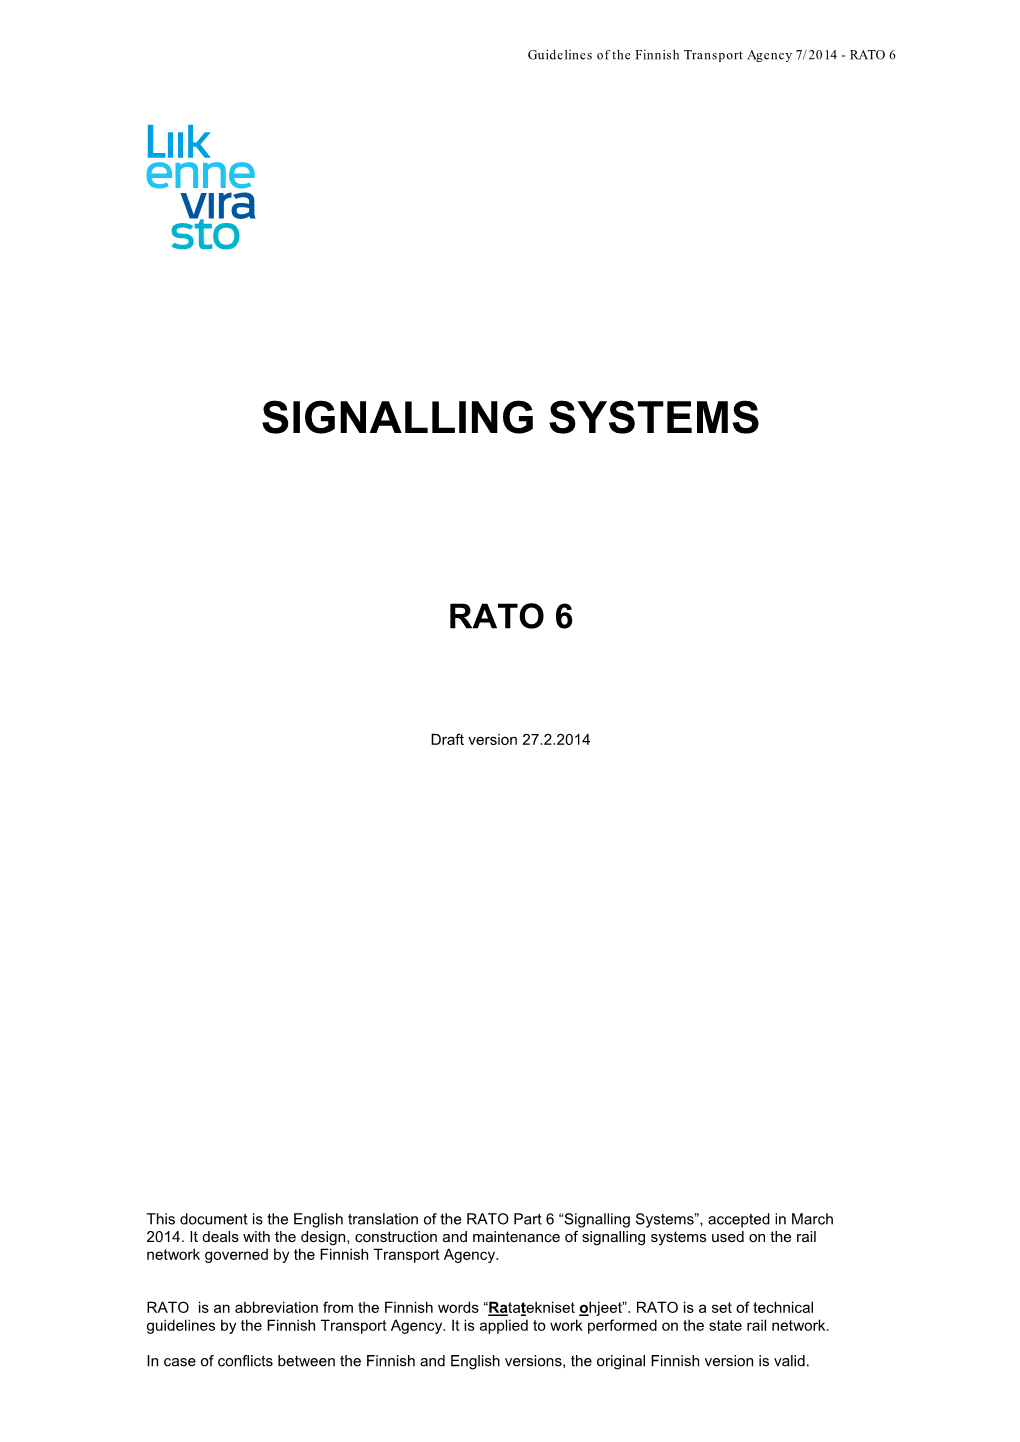 Signalling Systems